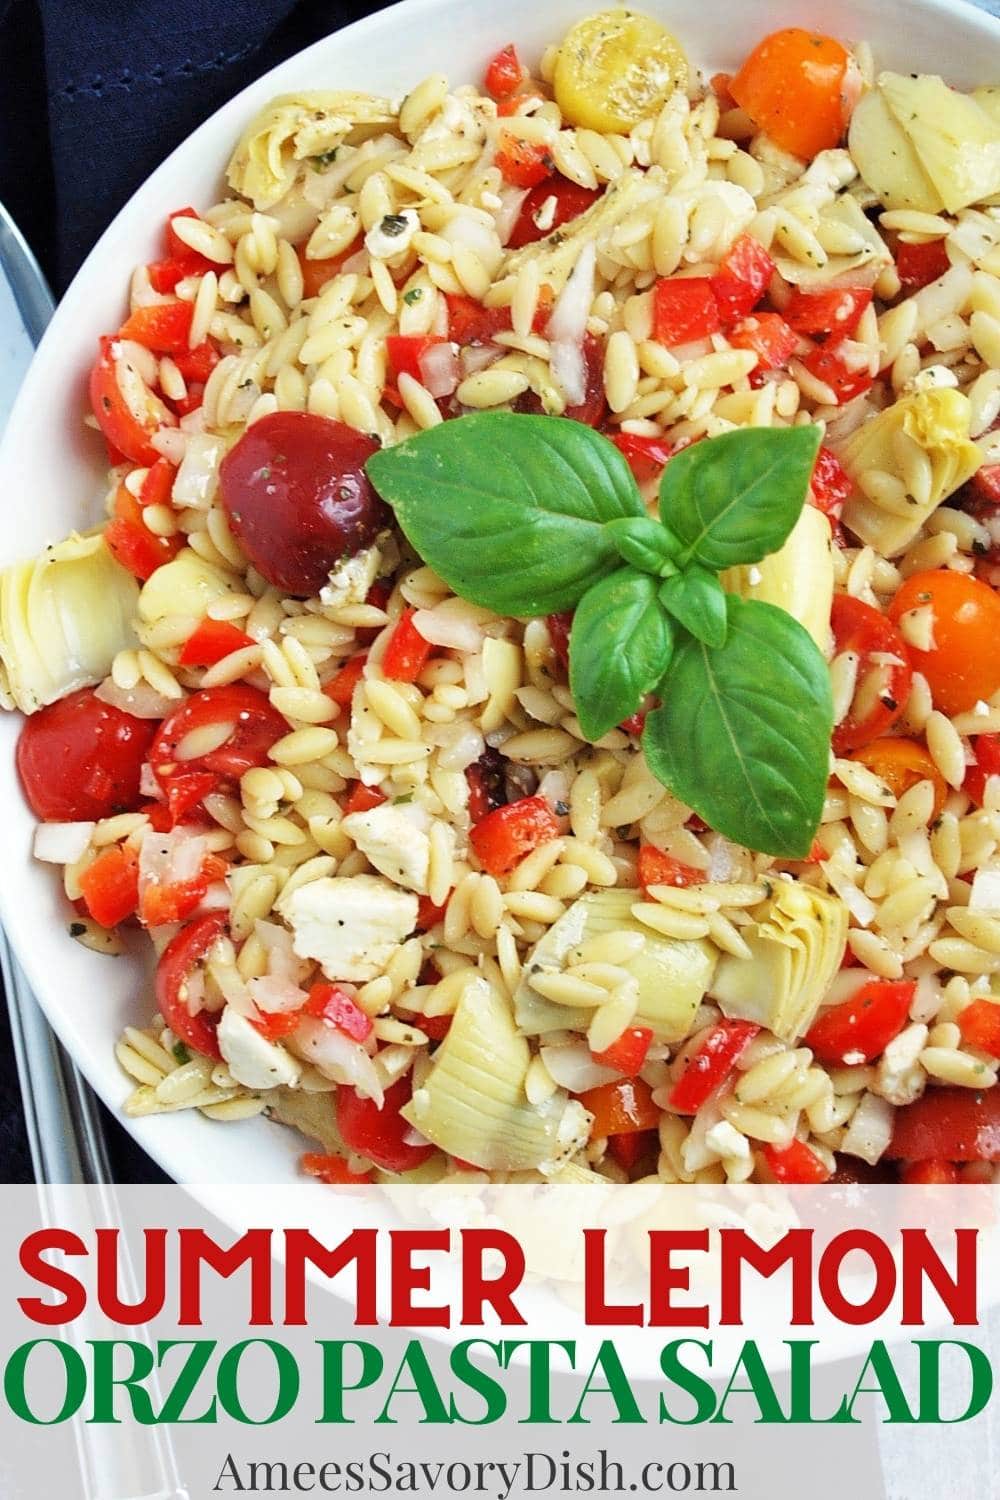 A flavorful orzo pasta salad recipe made with artichoke hearts, tomatoes, bell pepper, onion, and feta cheese tossed in a simple lemon vinaigrette dressing.   via @Ameessavorydish